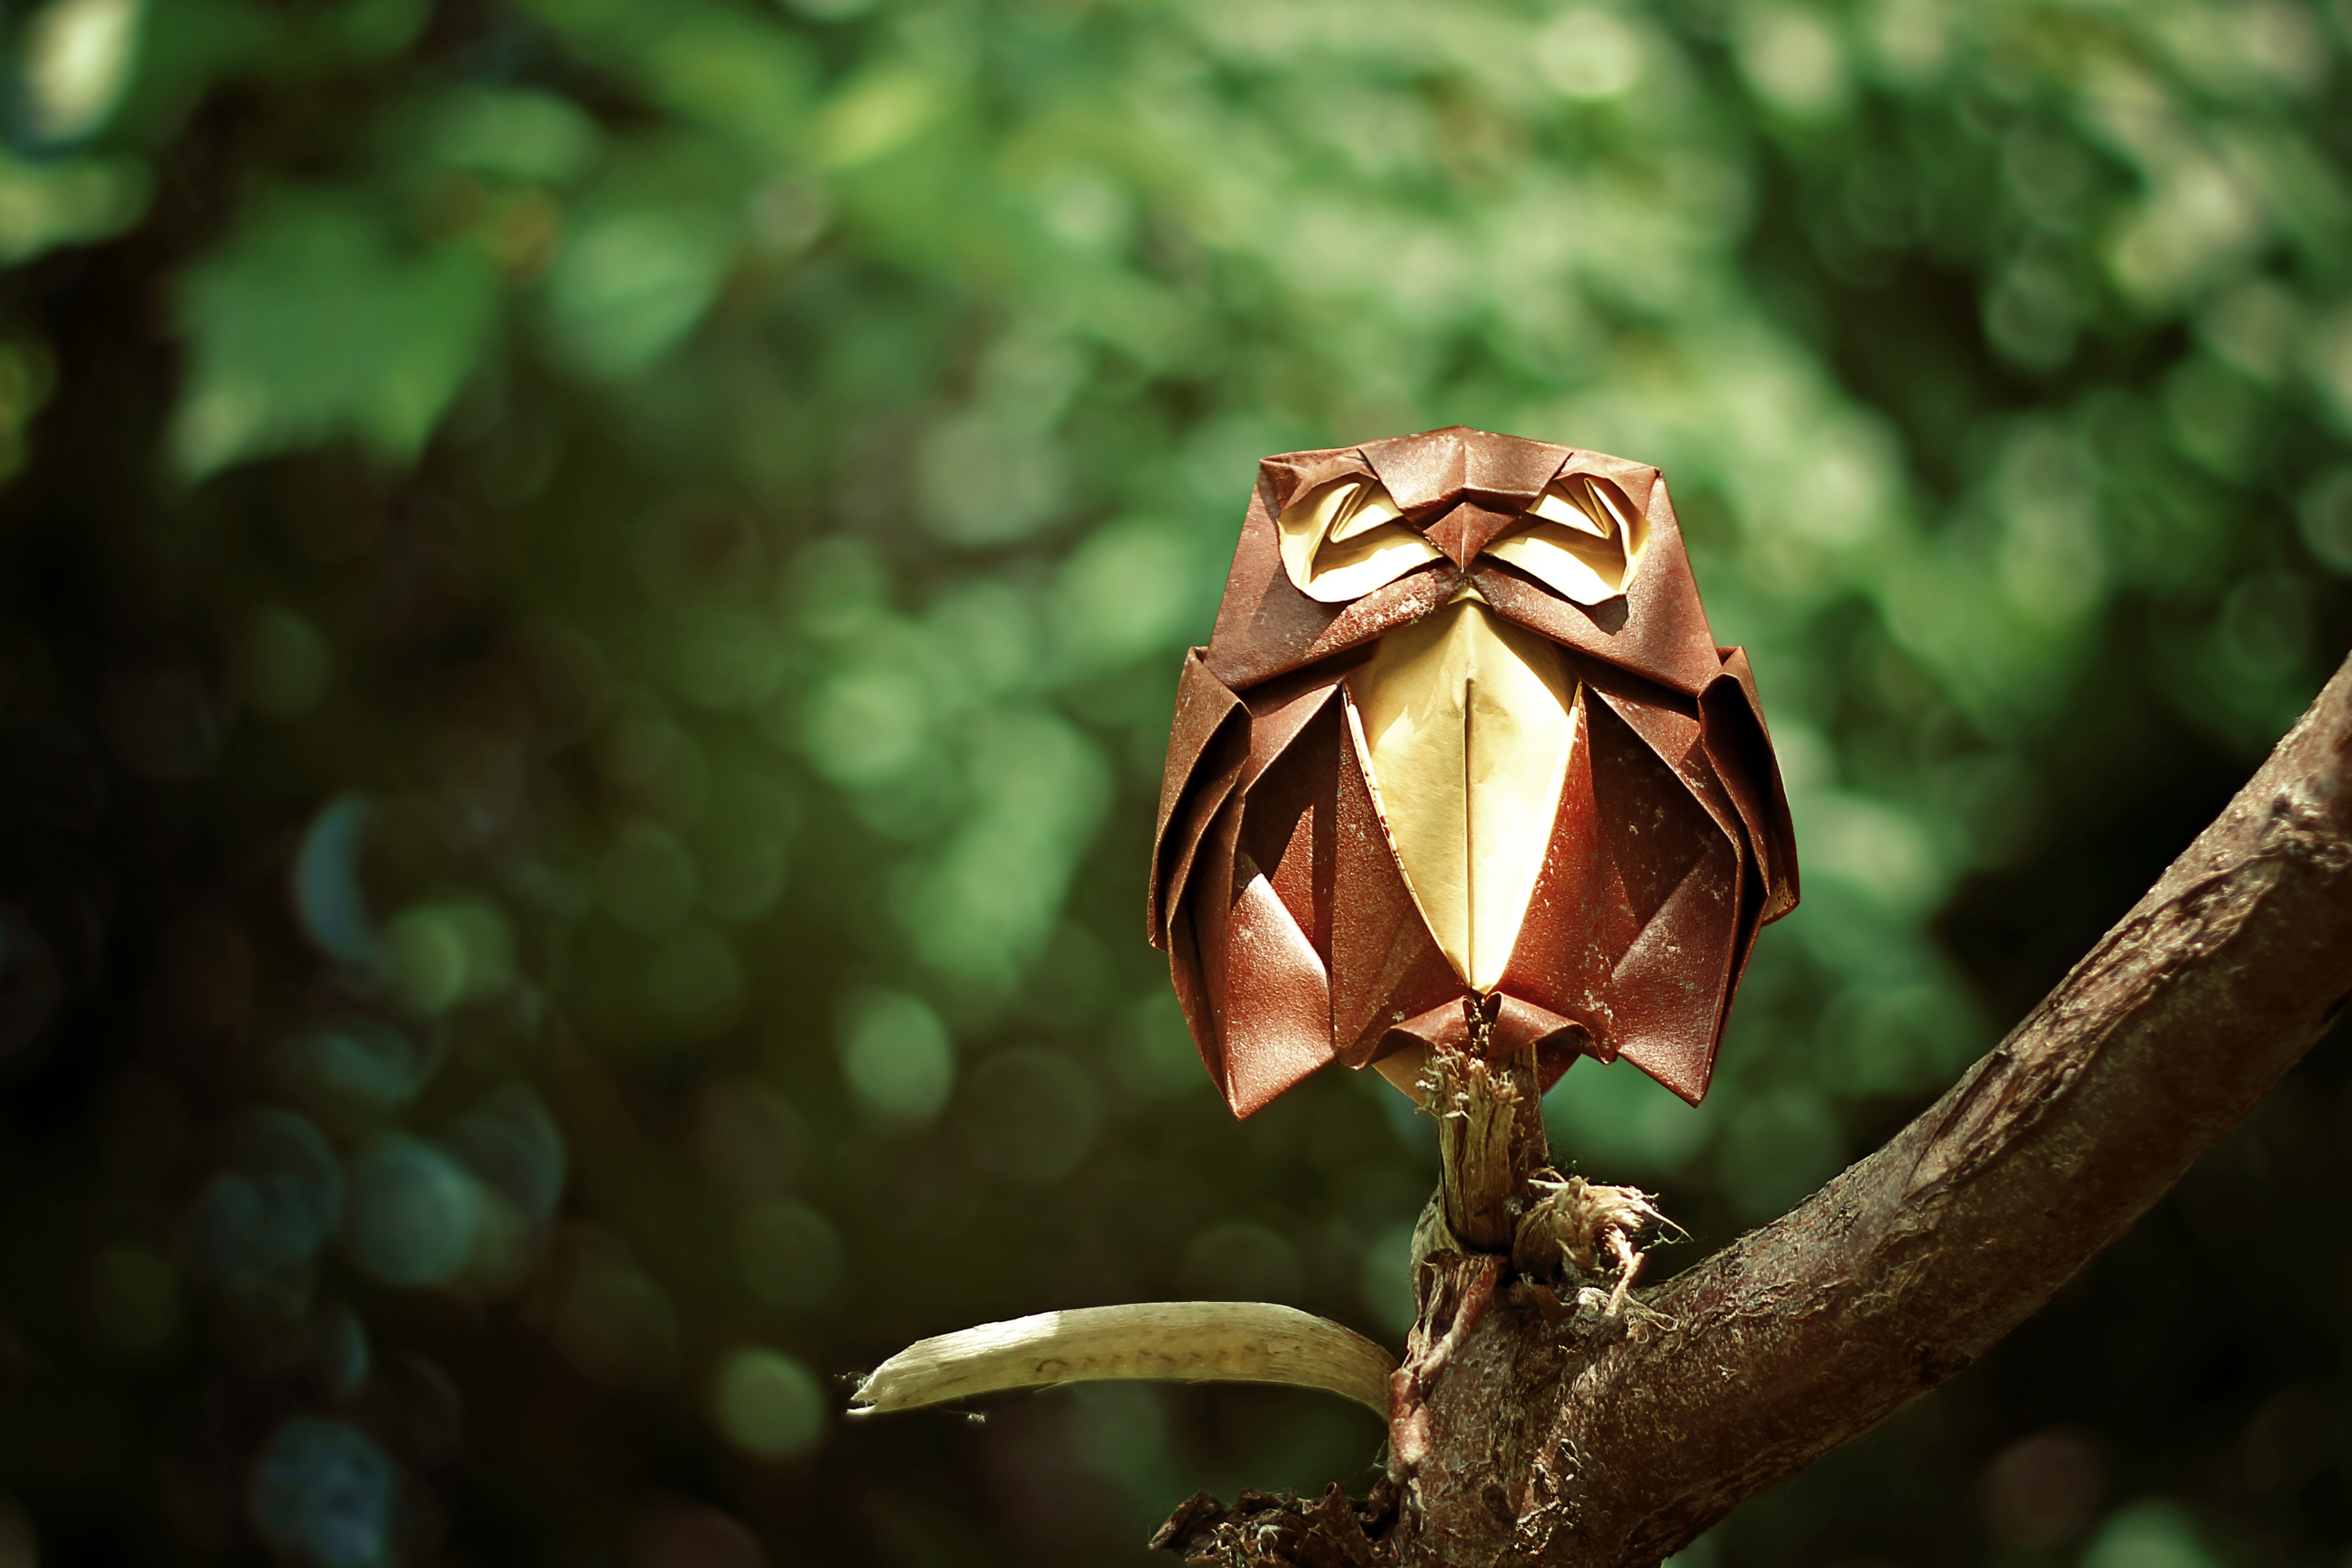 Man Made Origami HD Wallpaper | Background Image